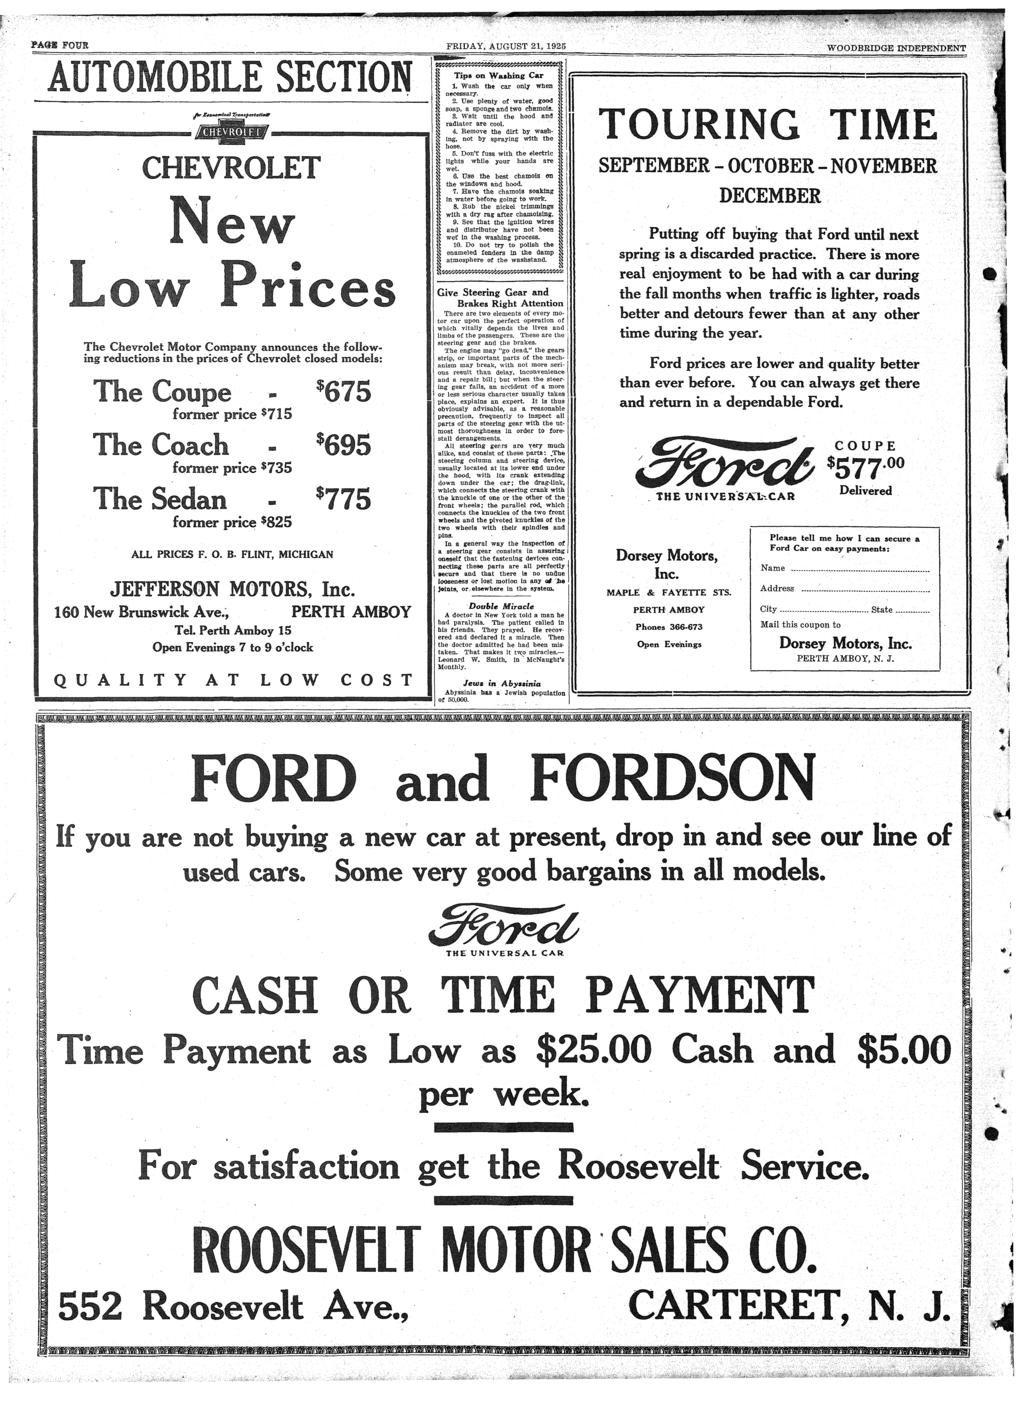 FAQS FOUE FRIDAY, AUGUST 21, 1925 WOODBRIDGE INDEPENDENT SECTION c The Chevrolet Motor Company announces the followng reductons In the prces of Chevrolet closed models: former prce $715 - former prce